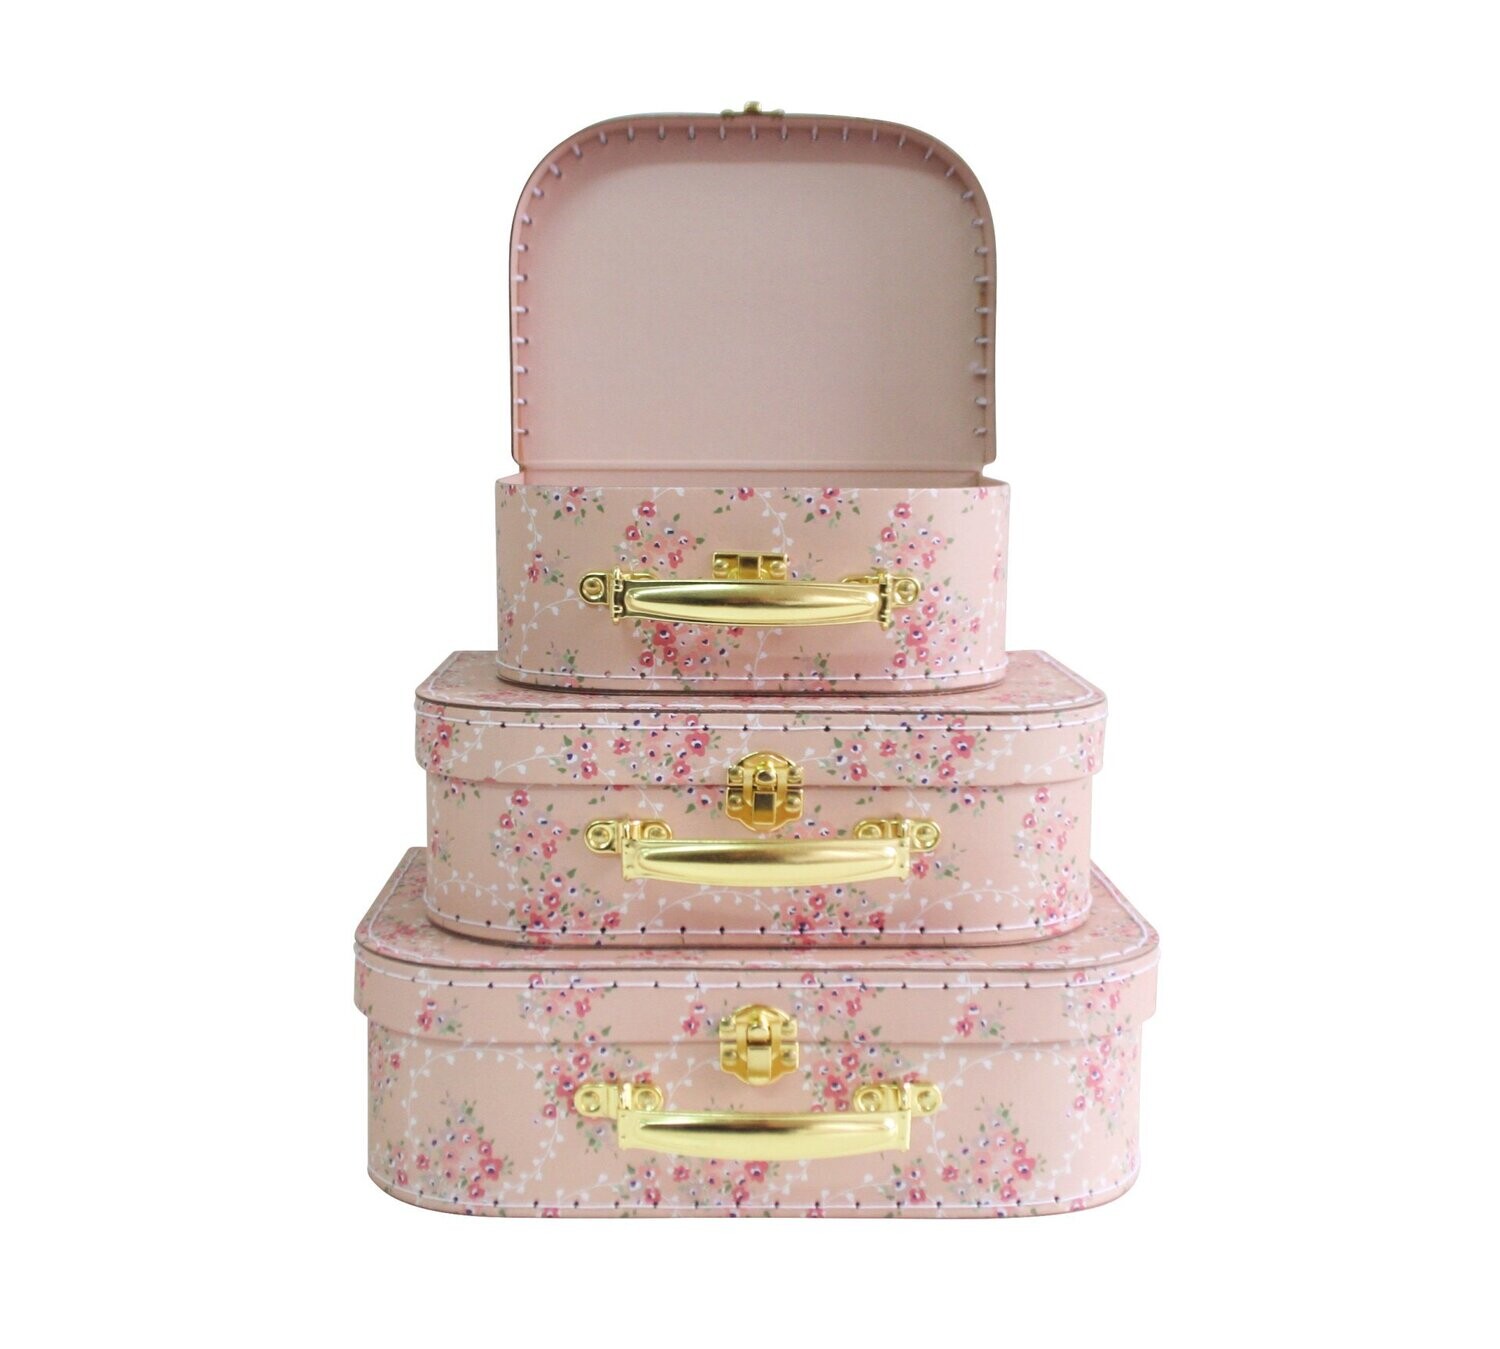 Alimrose Carry Case Pink Floral Wreath - Large